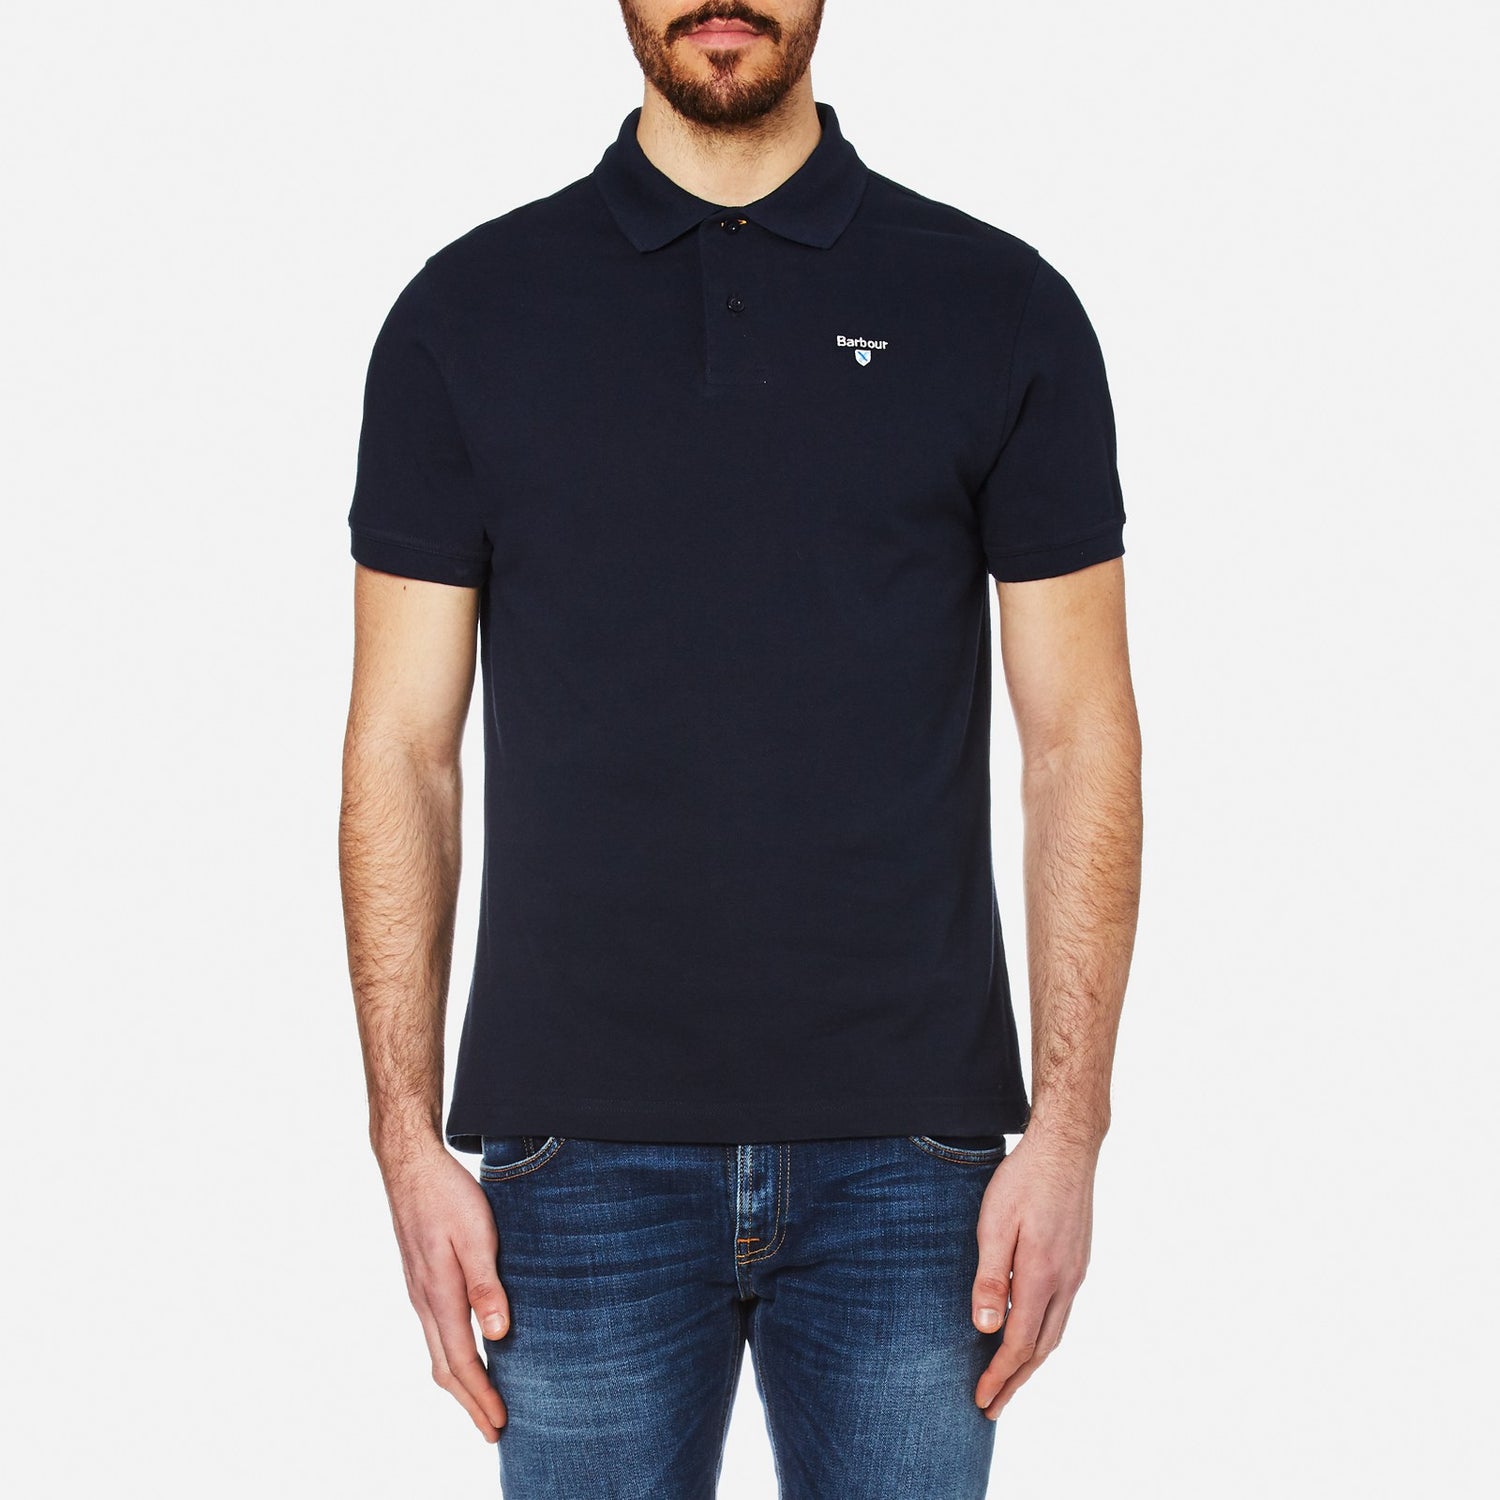 Barbour Heritage Men's Sports Polo Shirt - New Navy - S